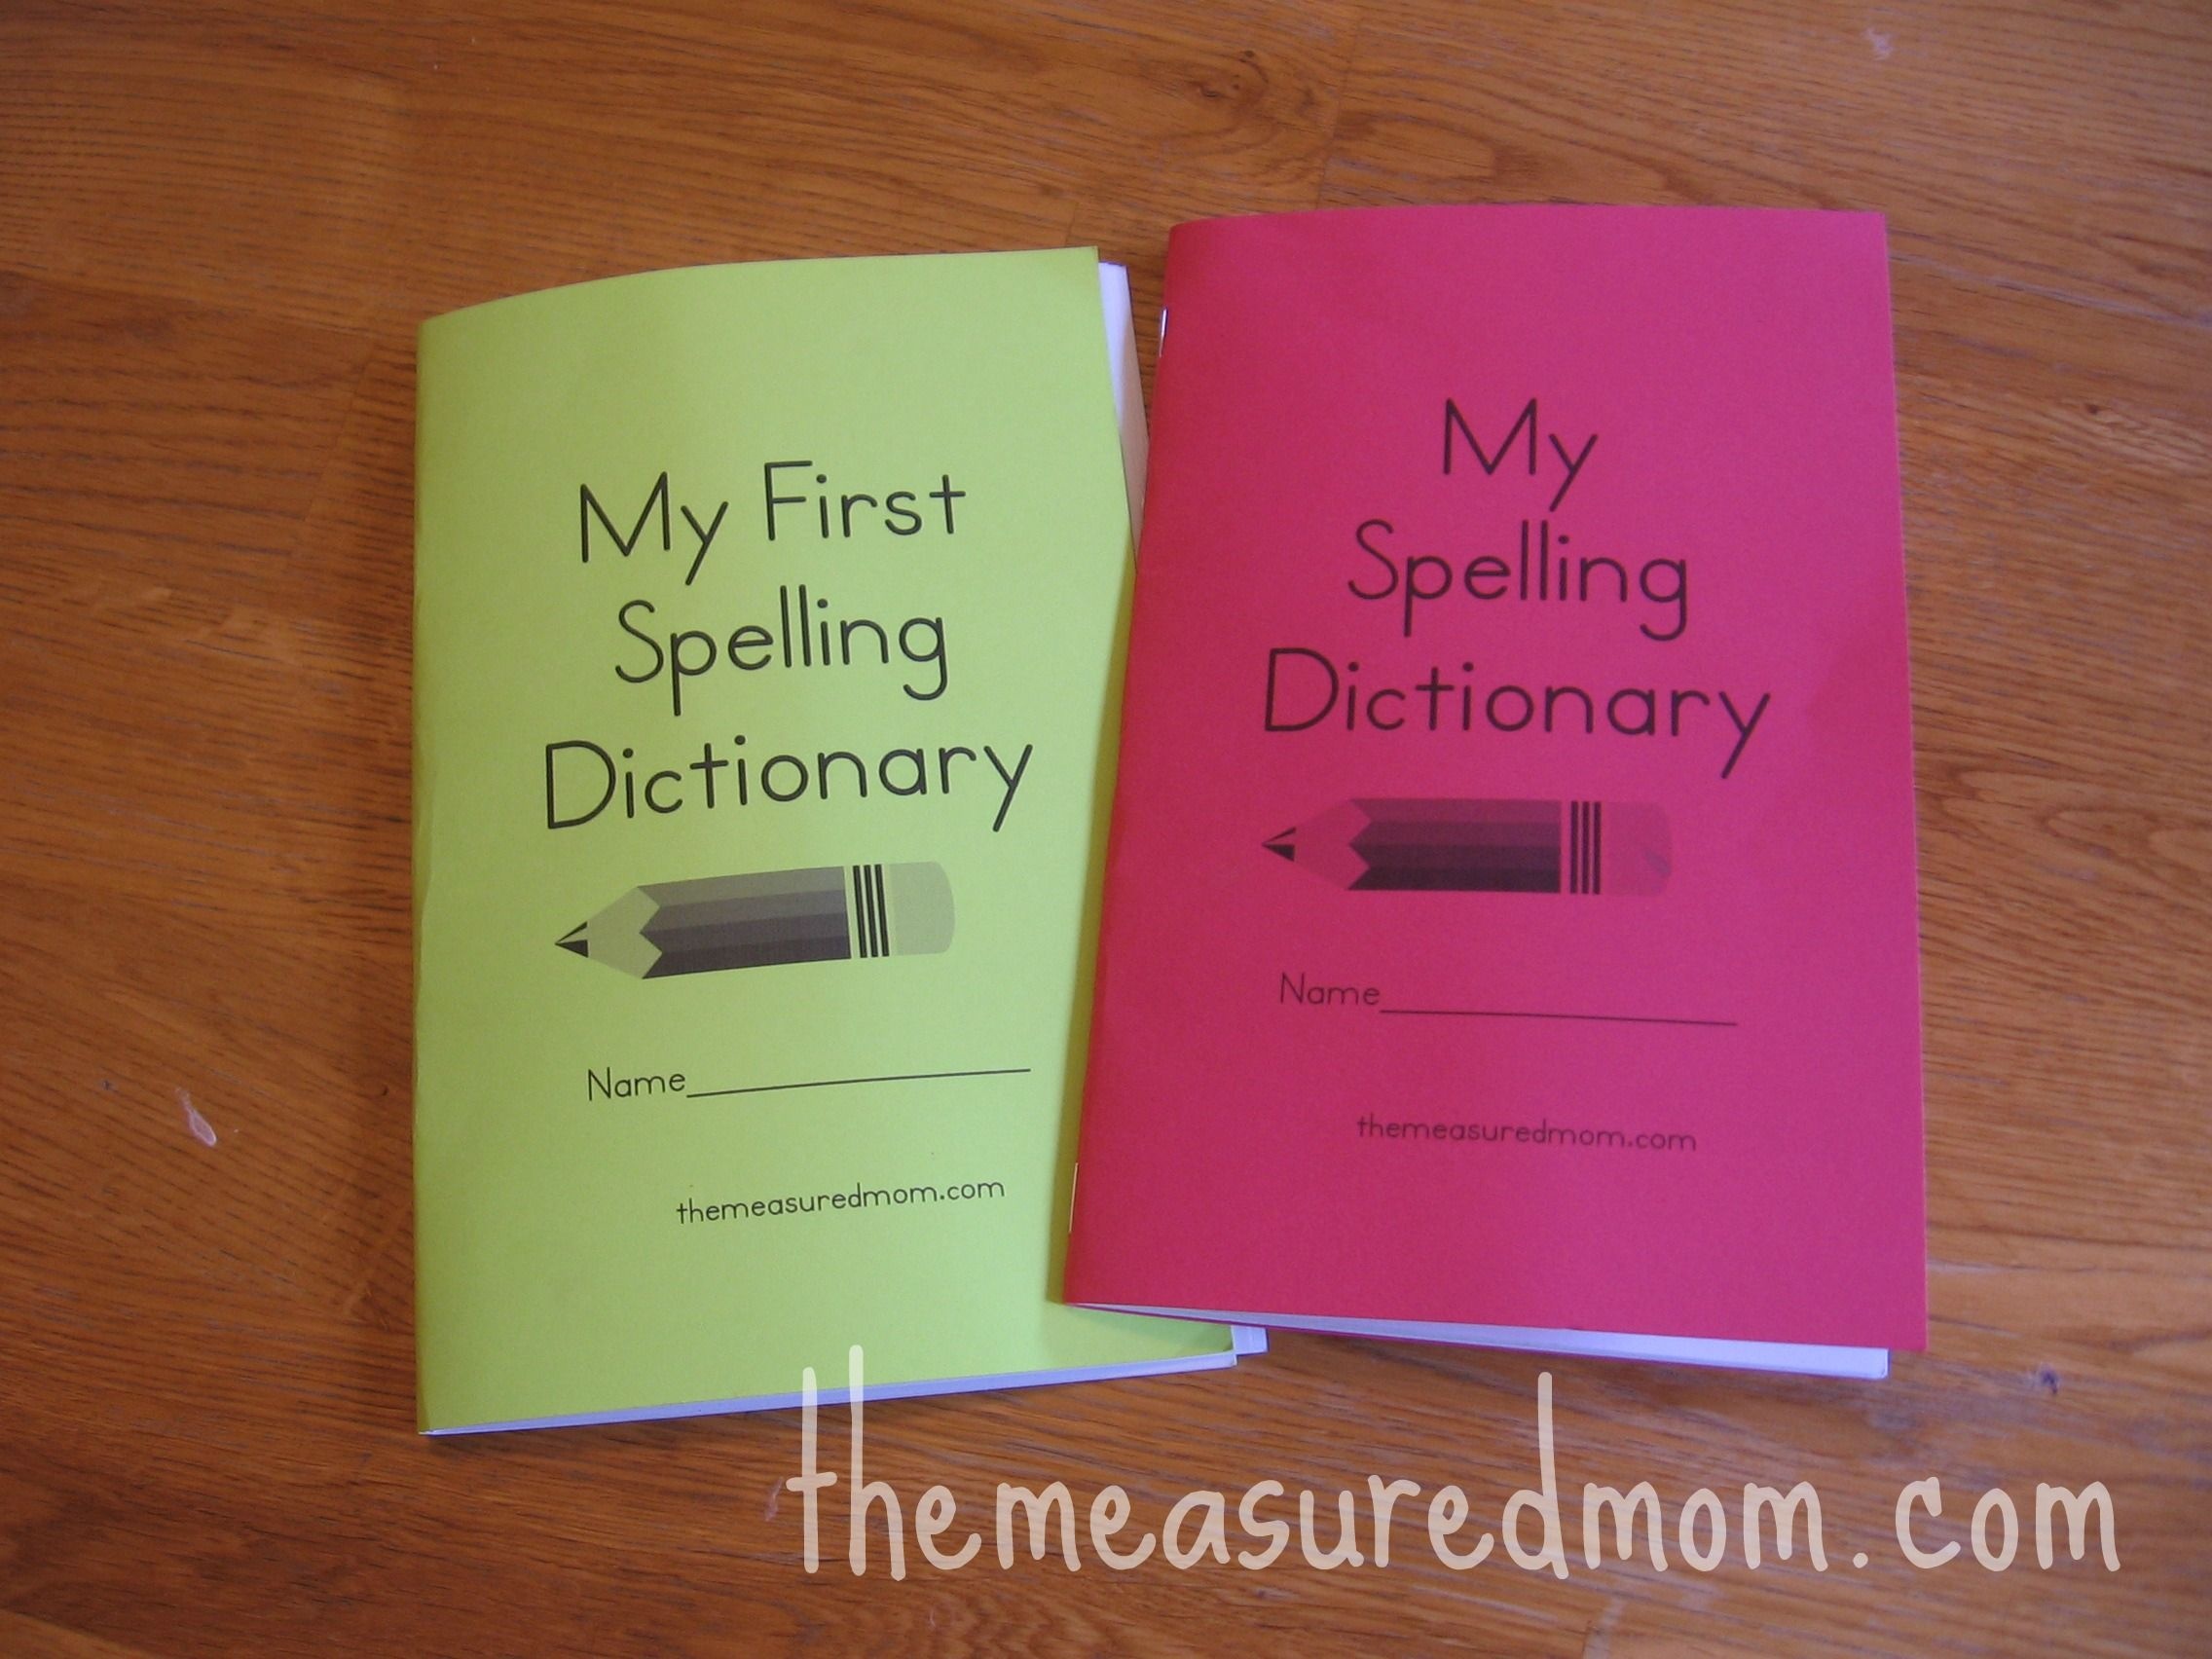 Printable Spelling Dictionary For Kids | Free Cute Printables - My Spelling Dictionary Printable Free